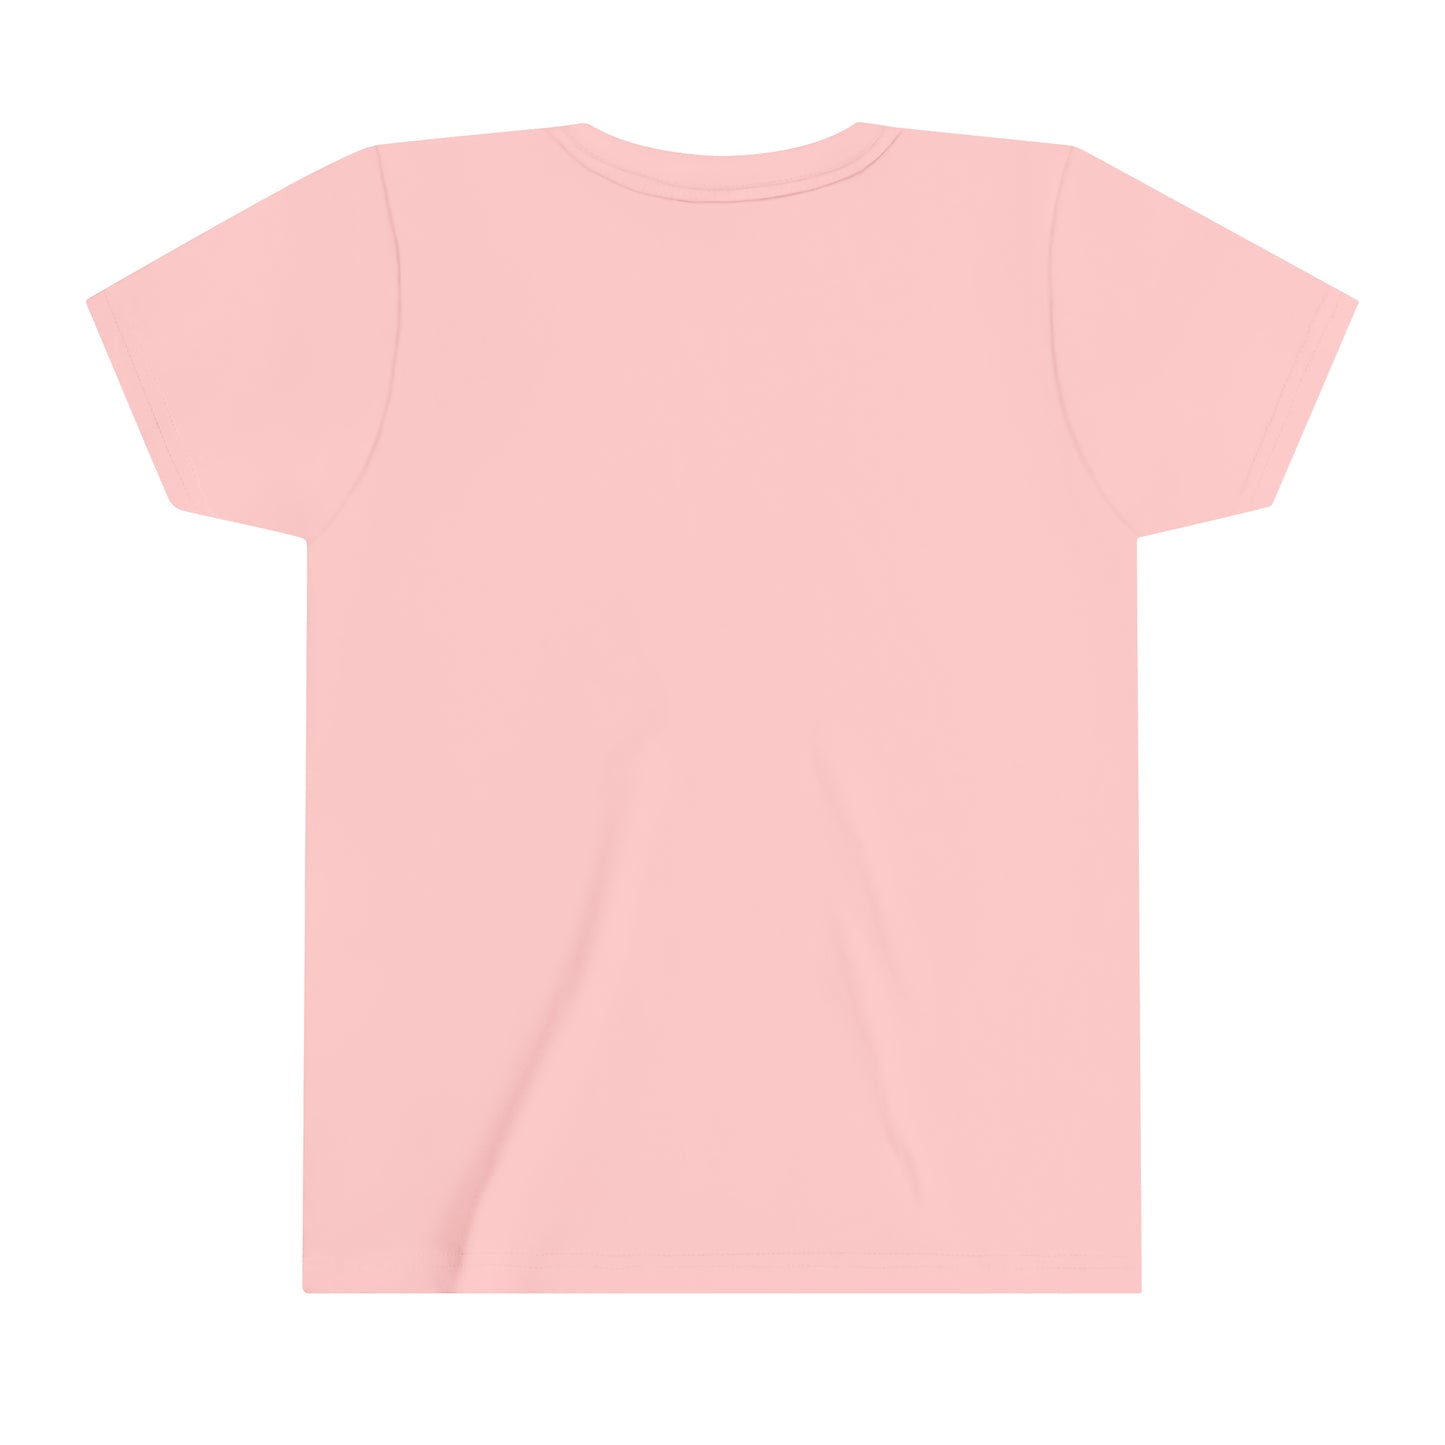 Favorite Place Bella Canvas Youth Short Sleeve Tee